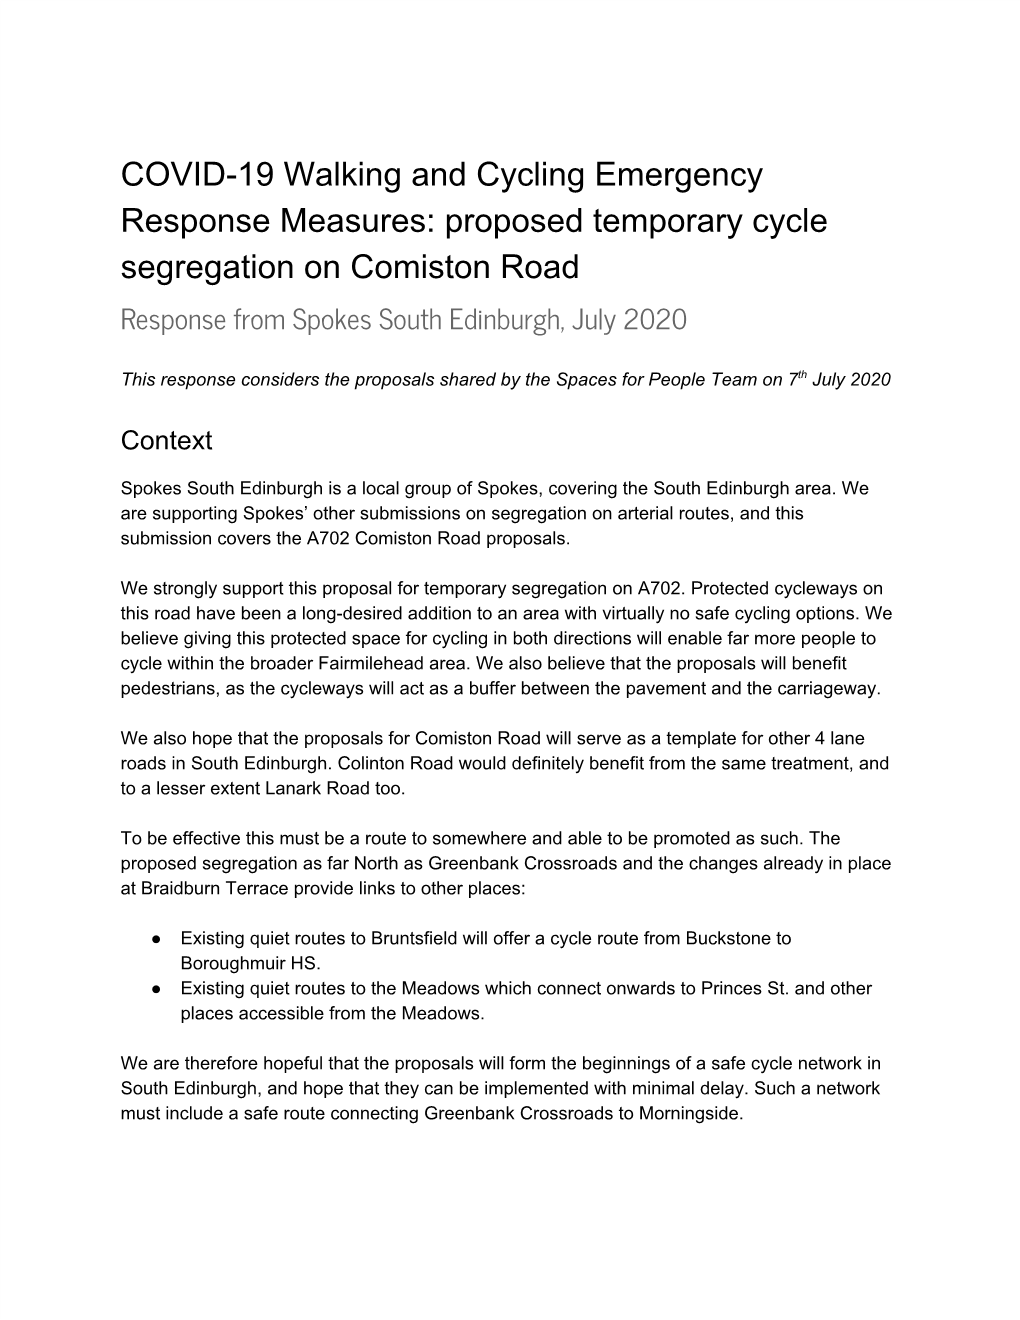 Proposed Temporary Cycle Segregation on Comiston Road Response from Spokes South Edinburgh, July 2020